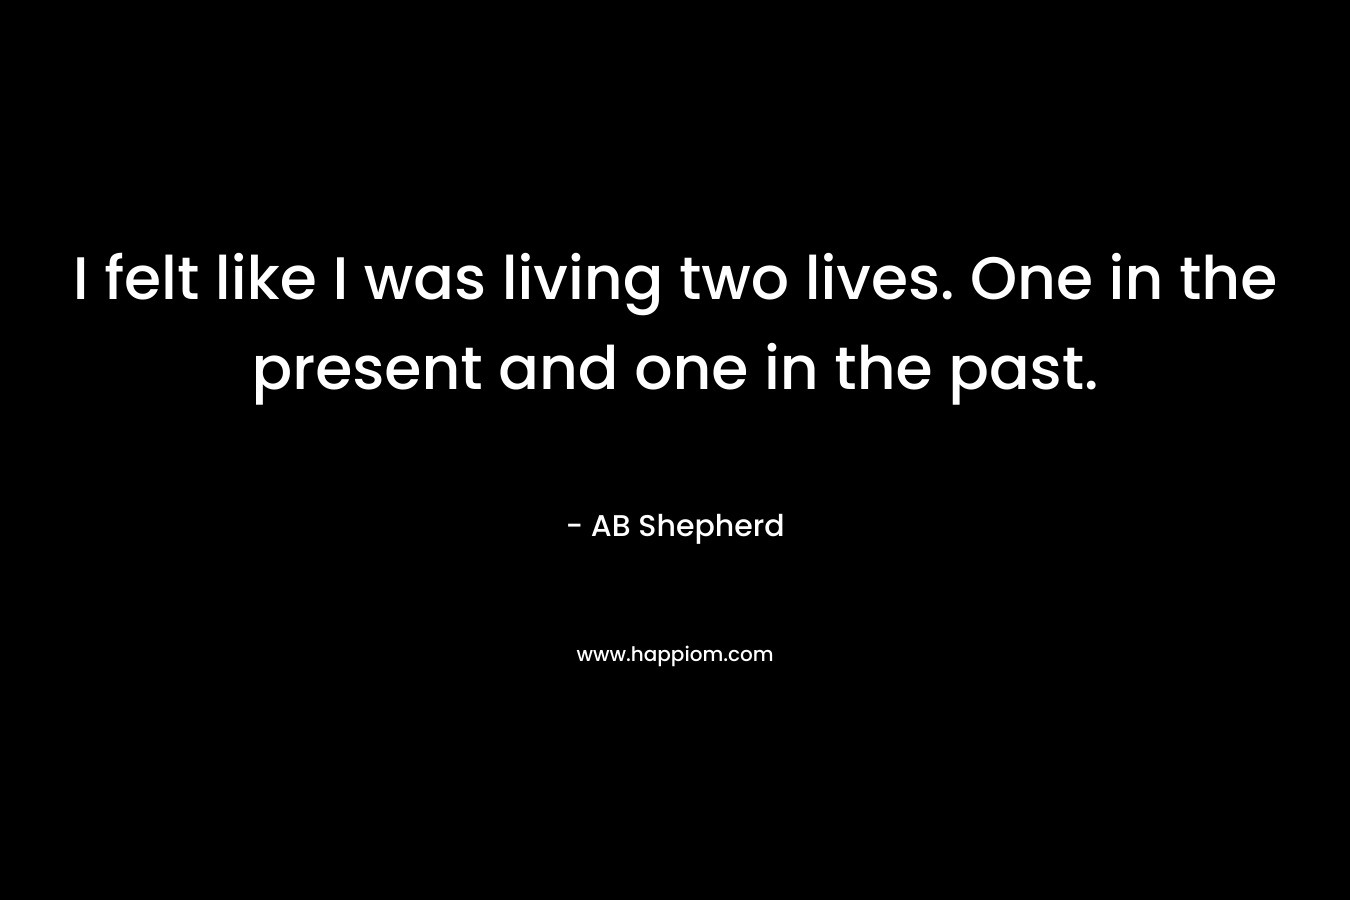 I felt like I was living two lives. One in the present and one in the past. – AB Shepherd